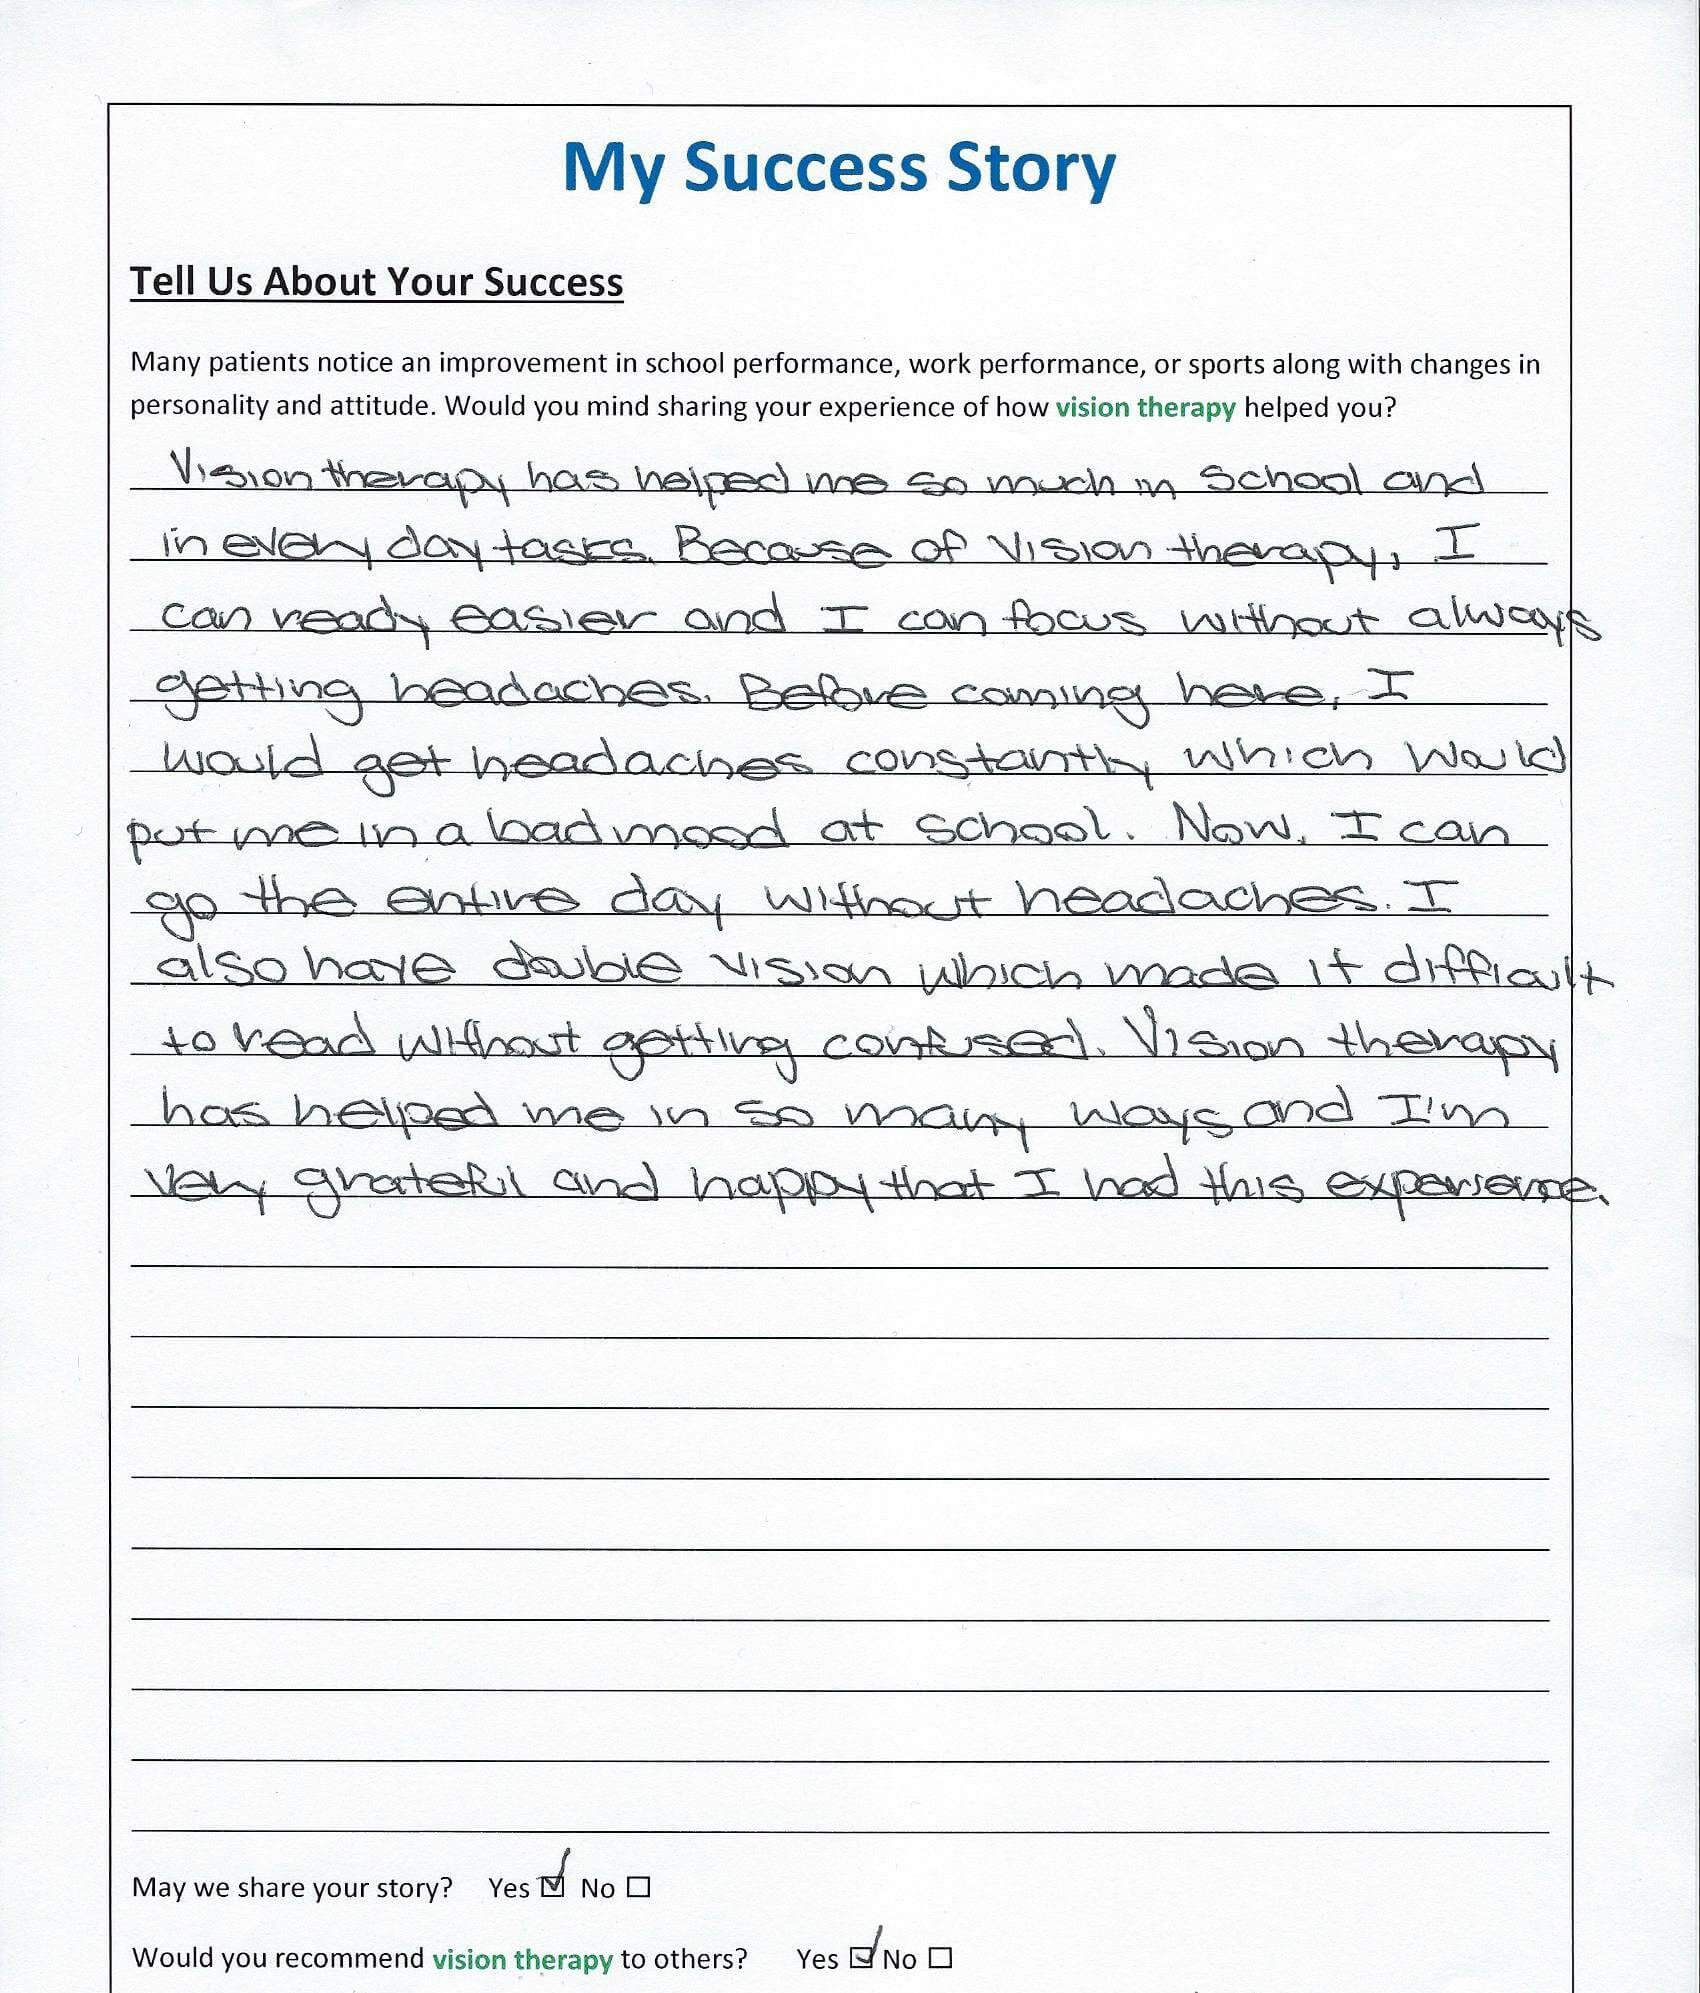 My Success Story Vision Therapy 05.06.19 edit